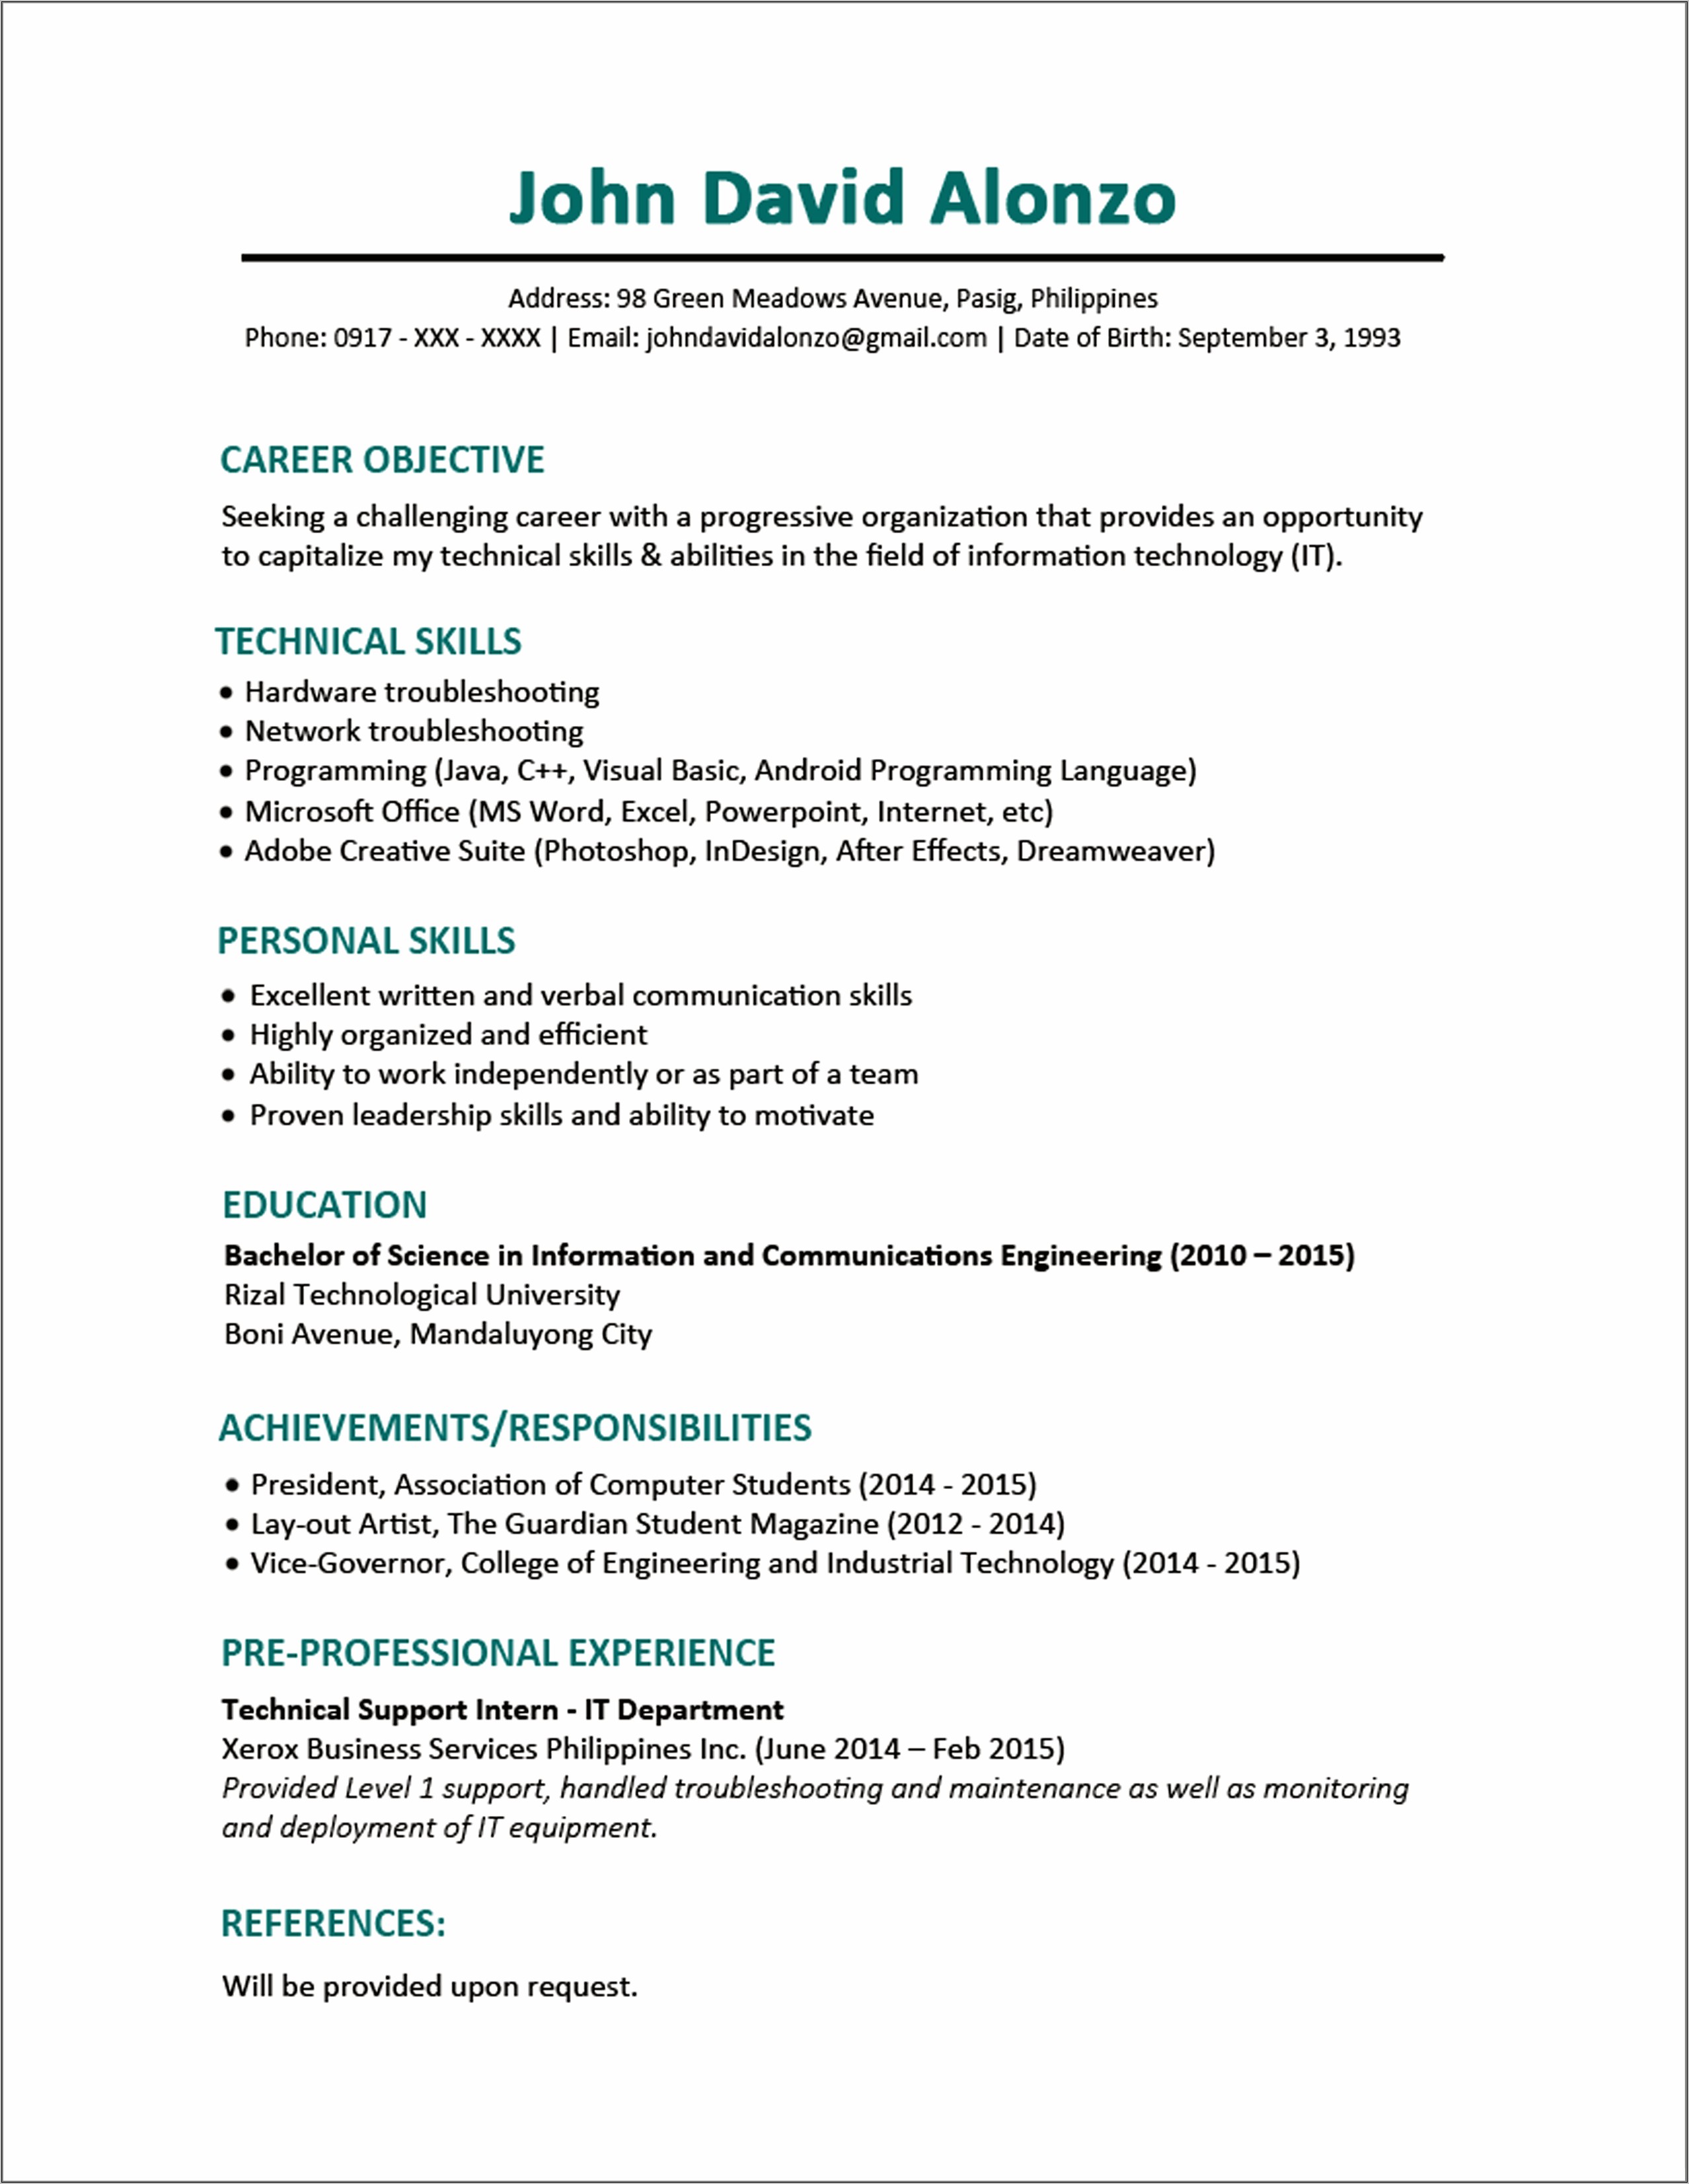 Sample Skills Section Of A Resume